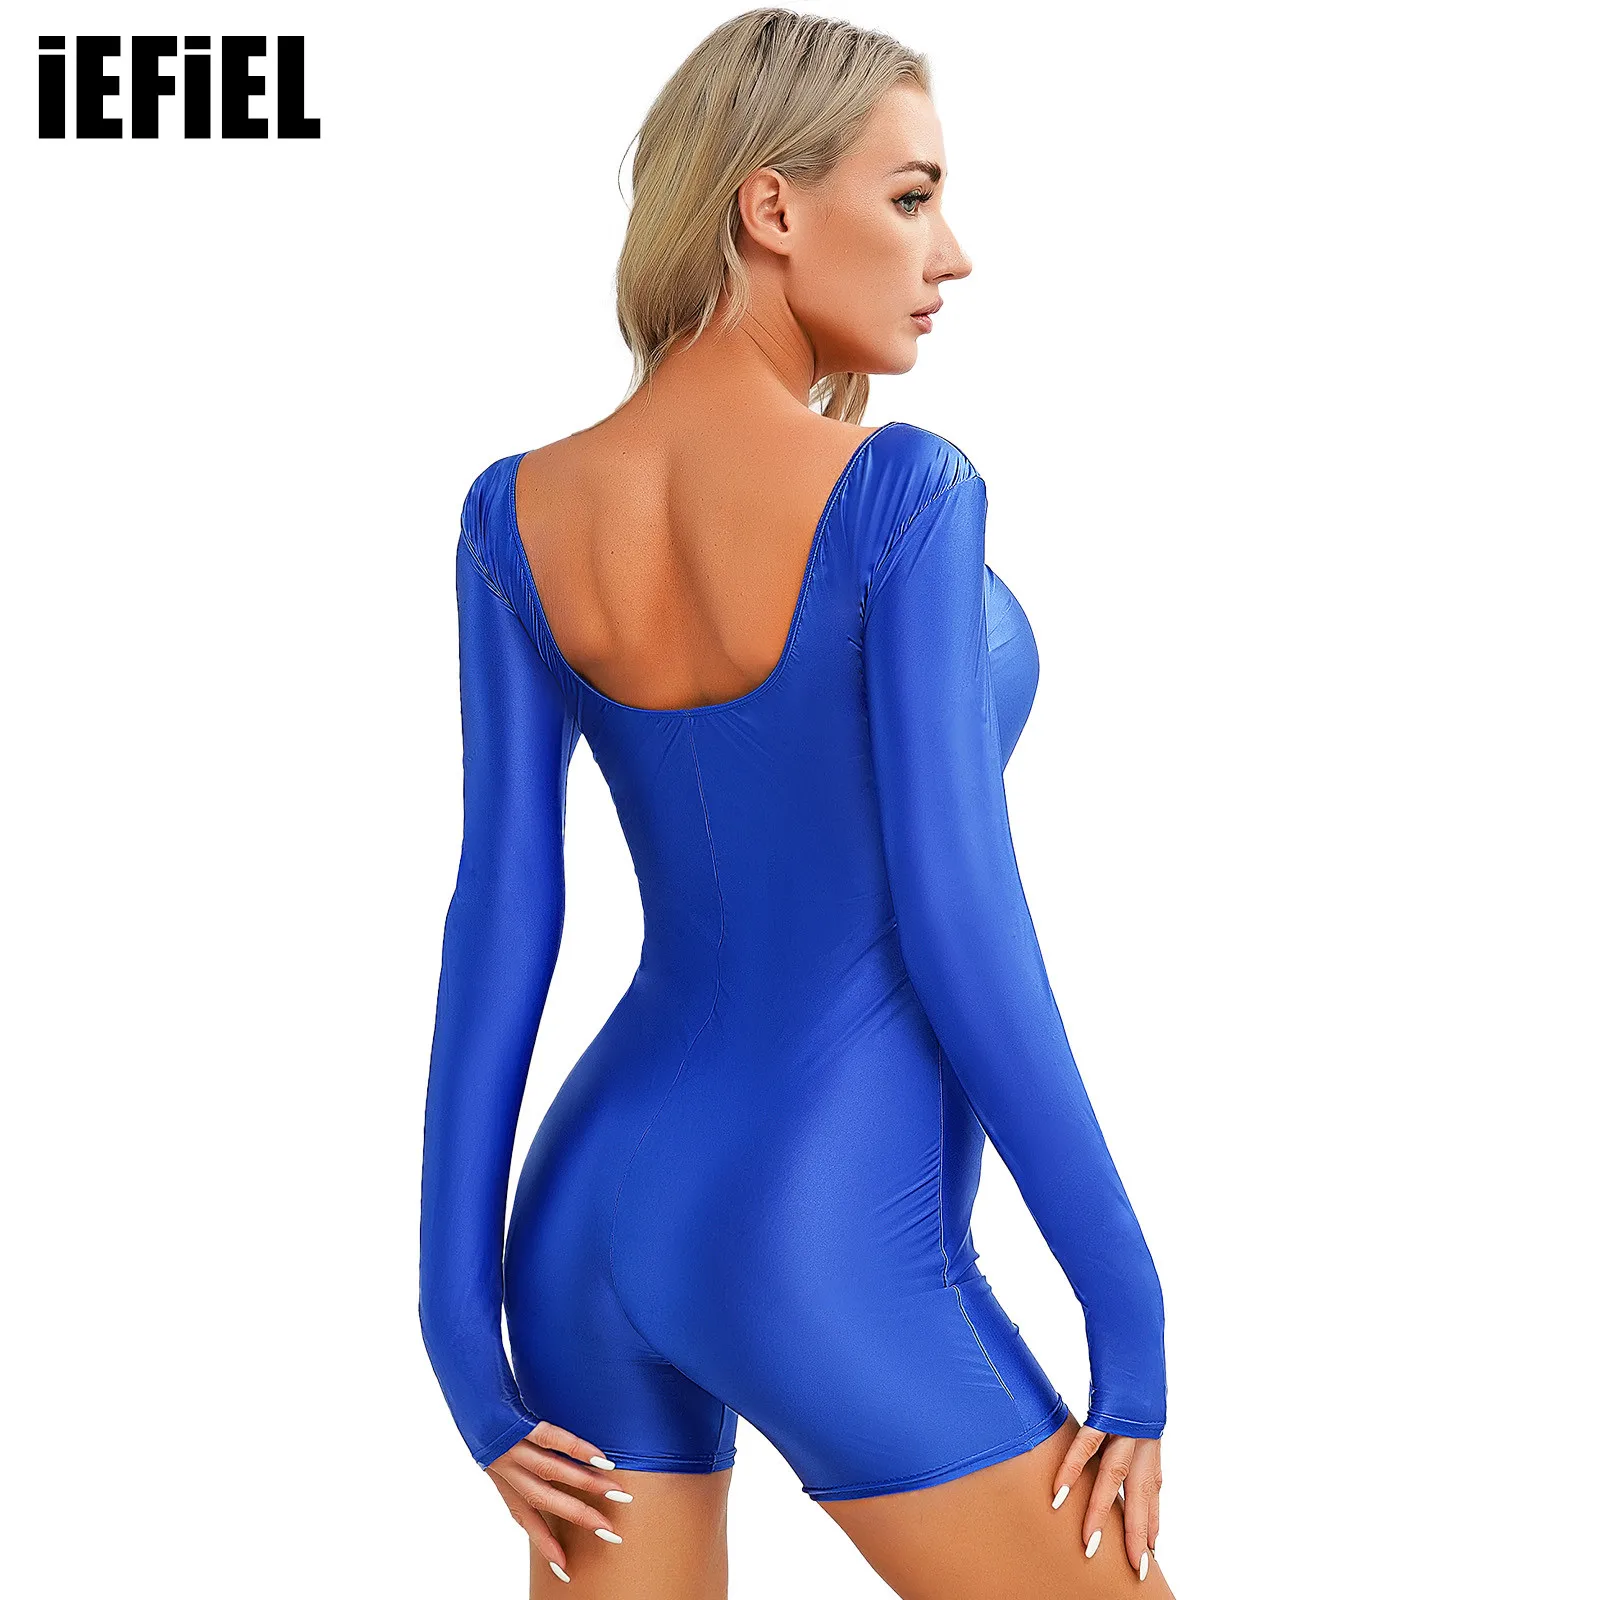 

Women Glossy Long Sleeve Bodysuit Solid Color Stretchy Round Neck Slim Fit Short Jumpsuit for Yoga Bodybuilding Exercises